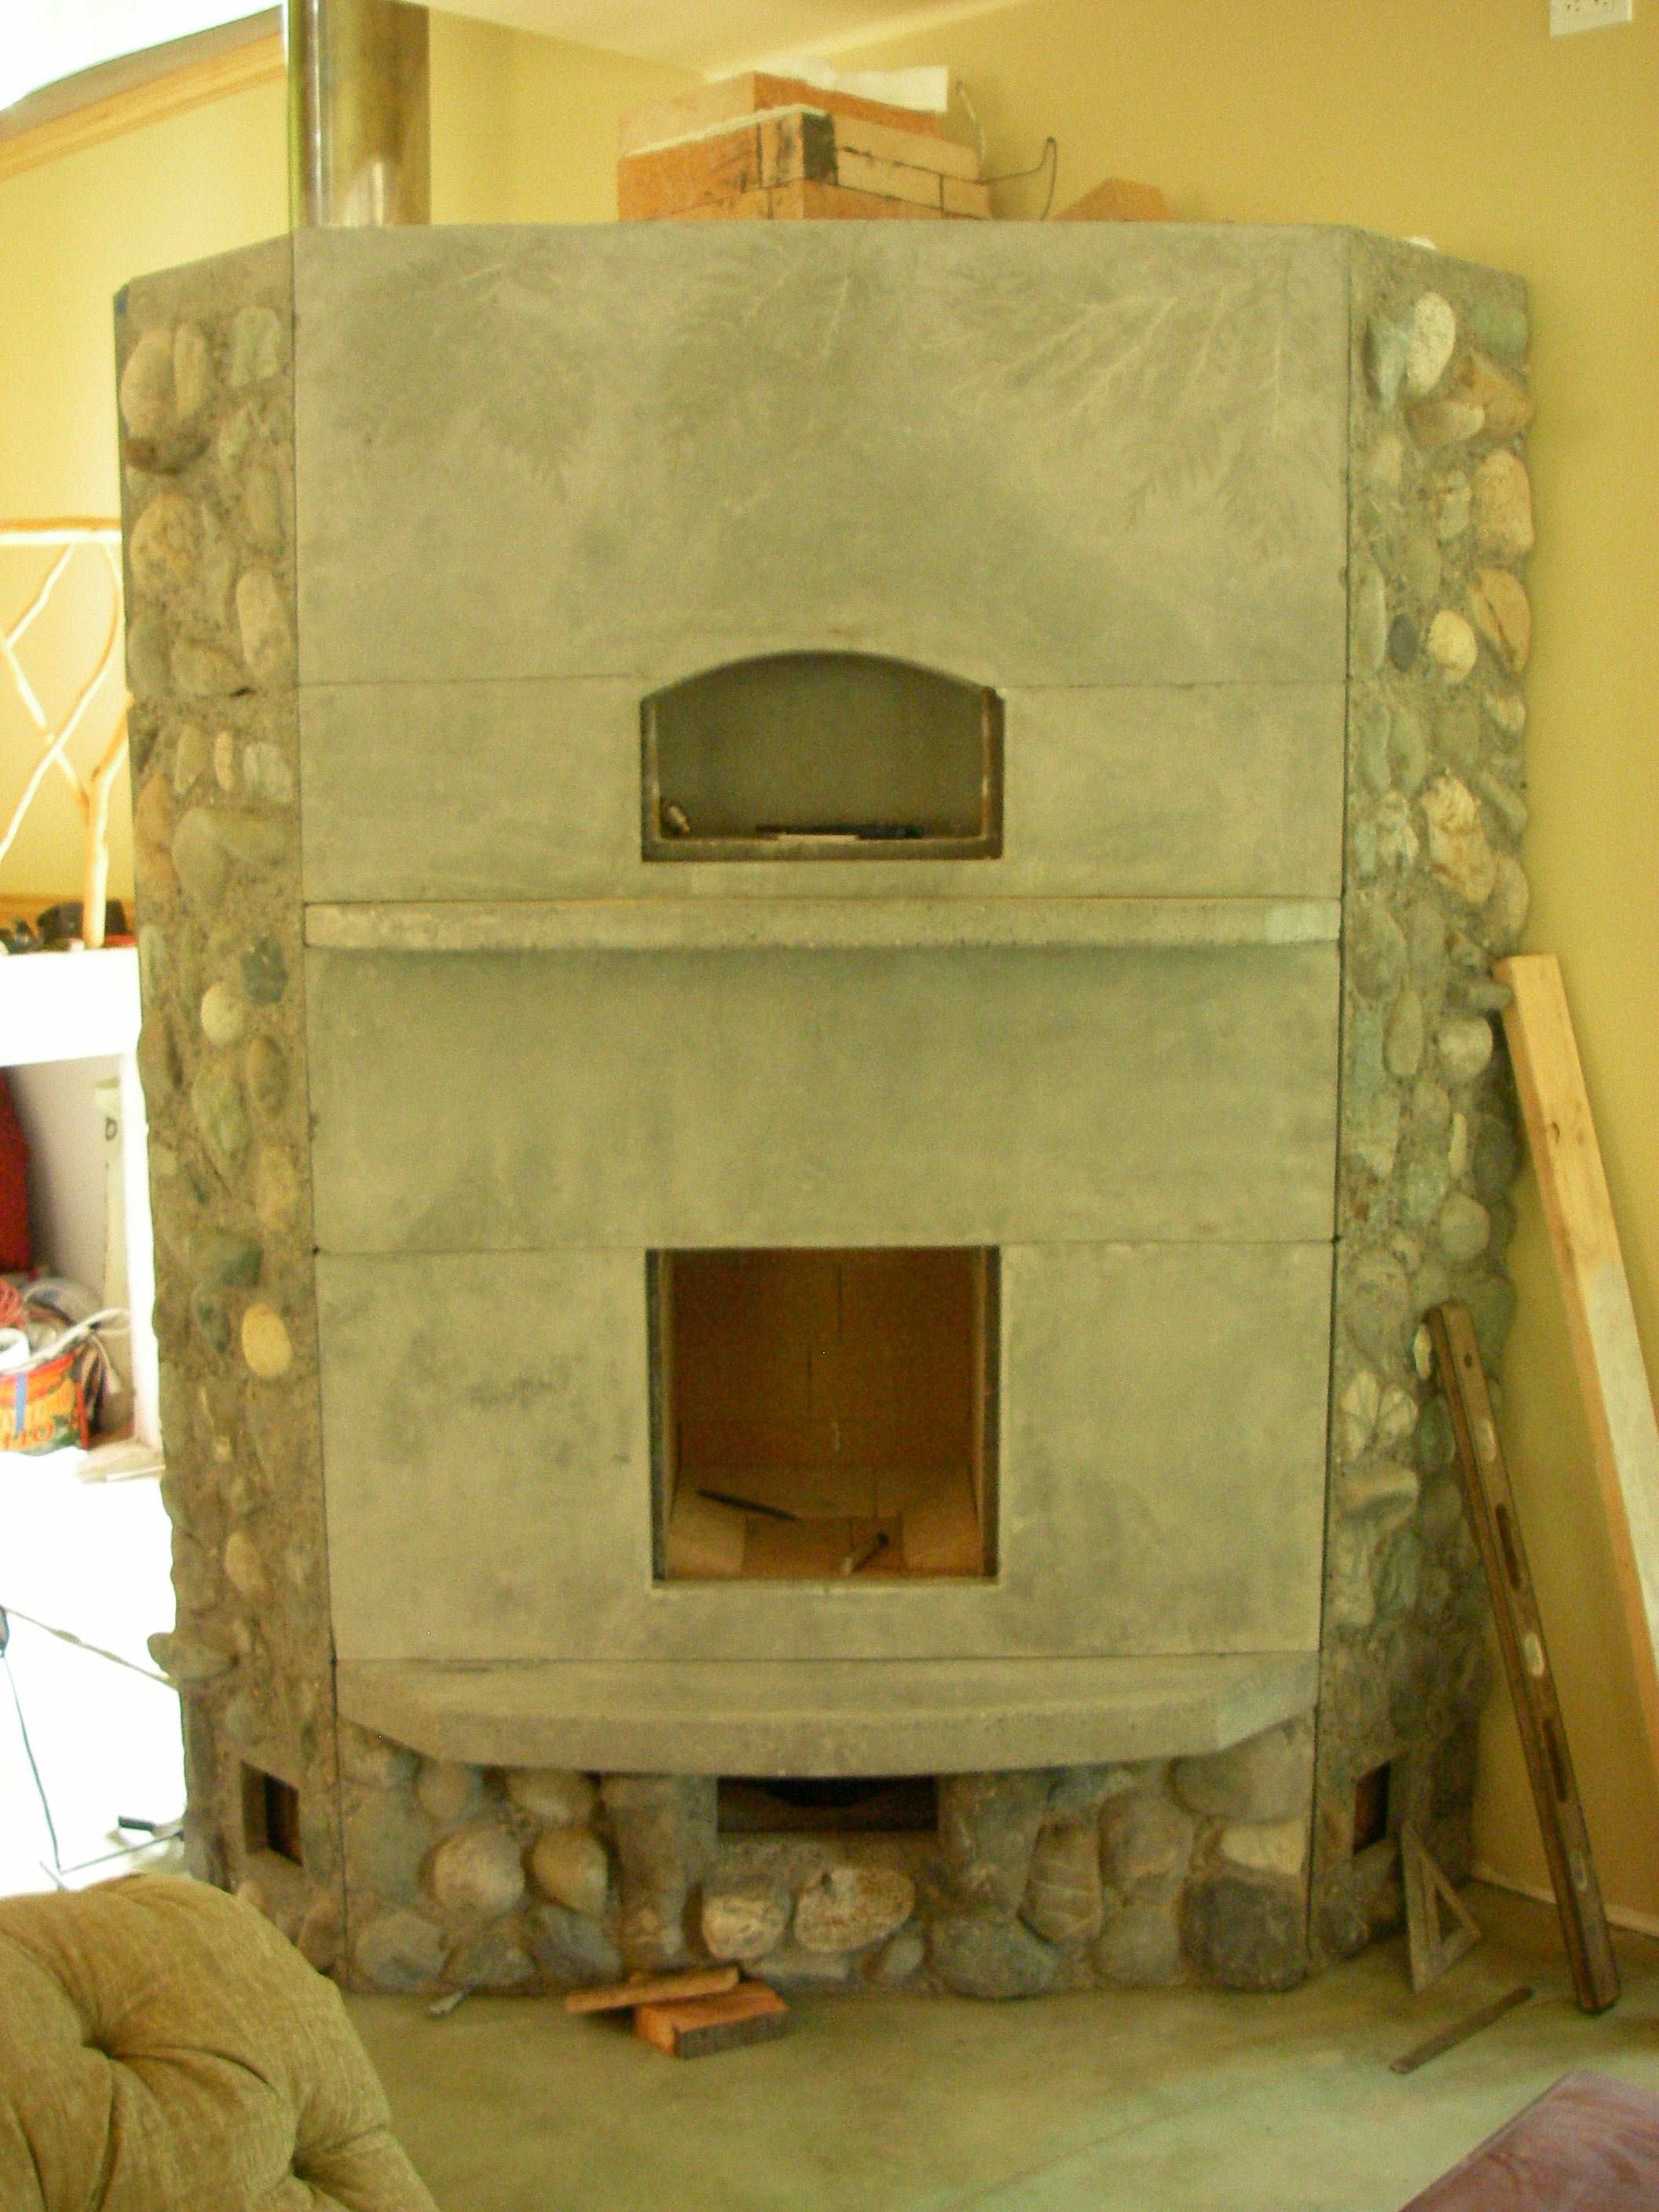 Finnish Fireplace before painting